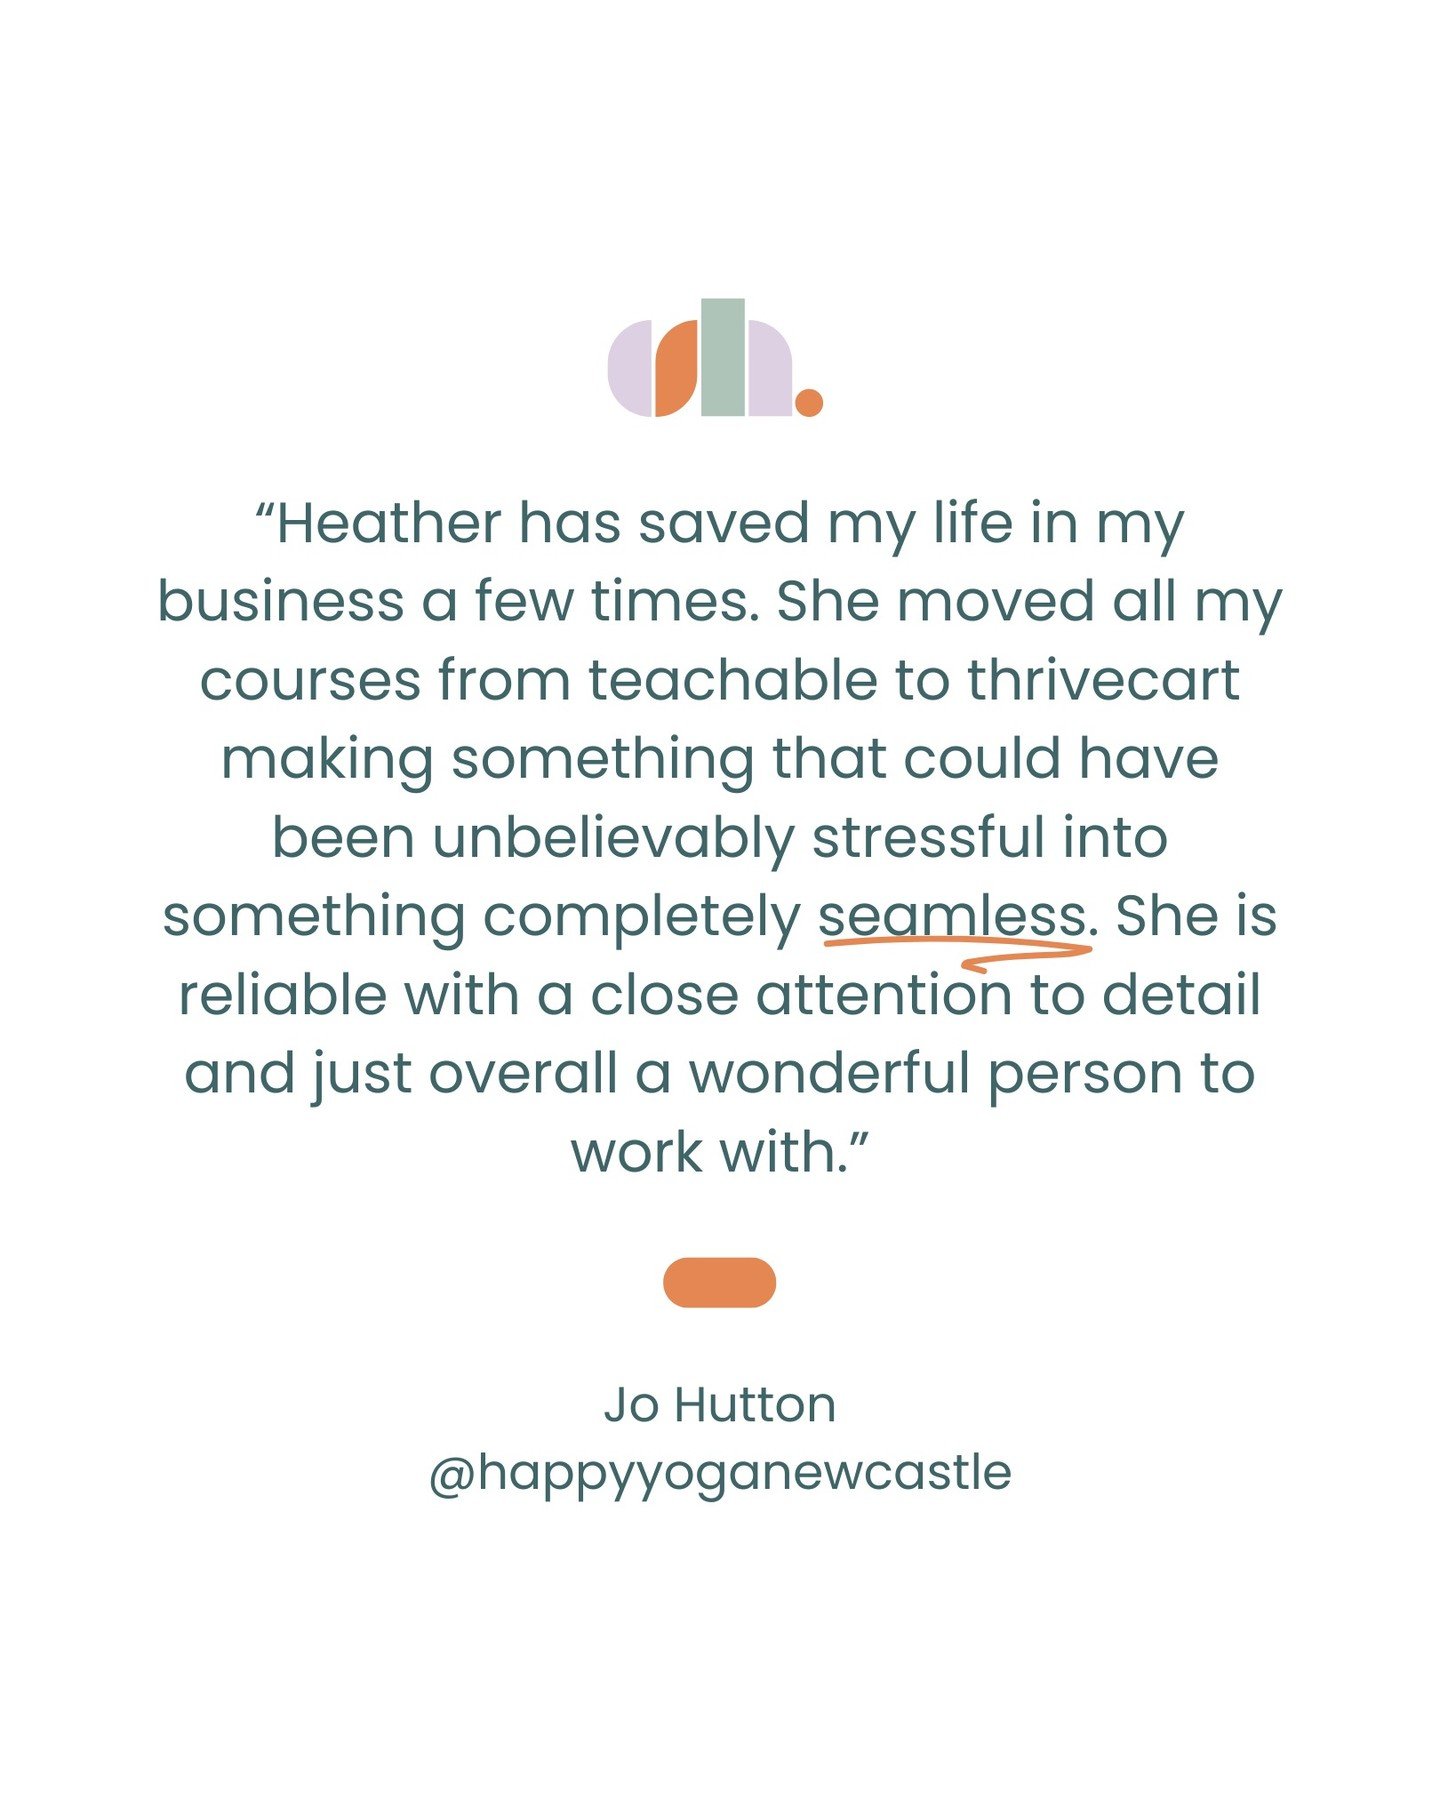 When Jo @happyyoganewcastle asked if I could help move her 200-hour Yoga Teacher Training Course and her Pregnancy Yoga Teacher Training Course from Teachable to ThriveCart, I knew this was a big project and I couldn't wait to get stuck in.

There we